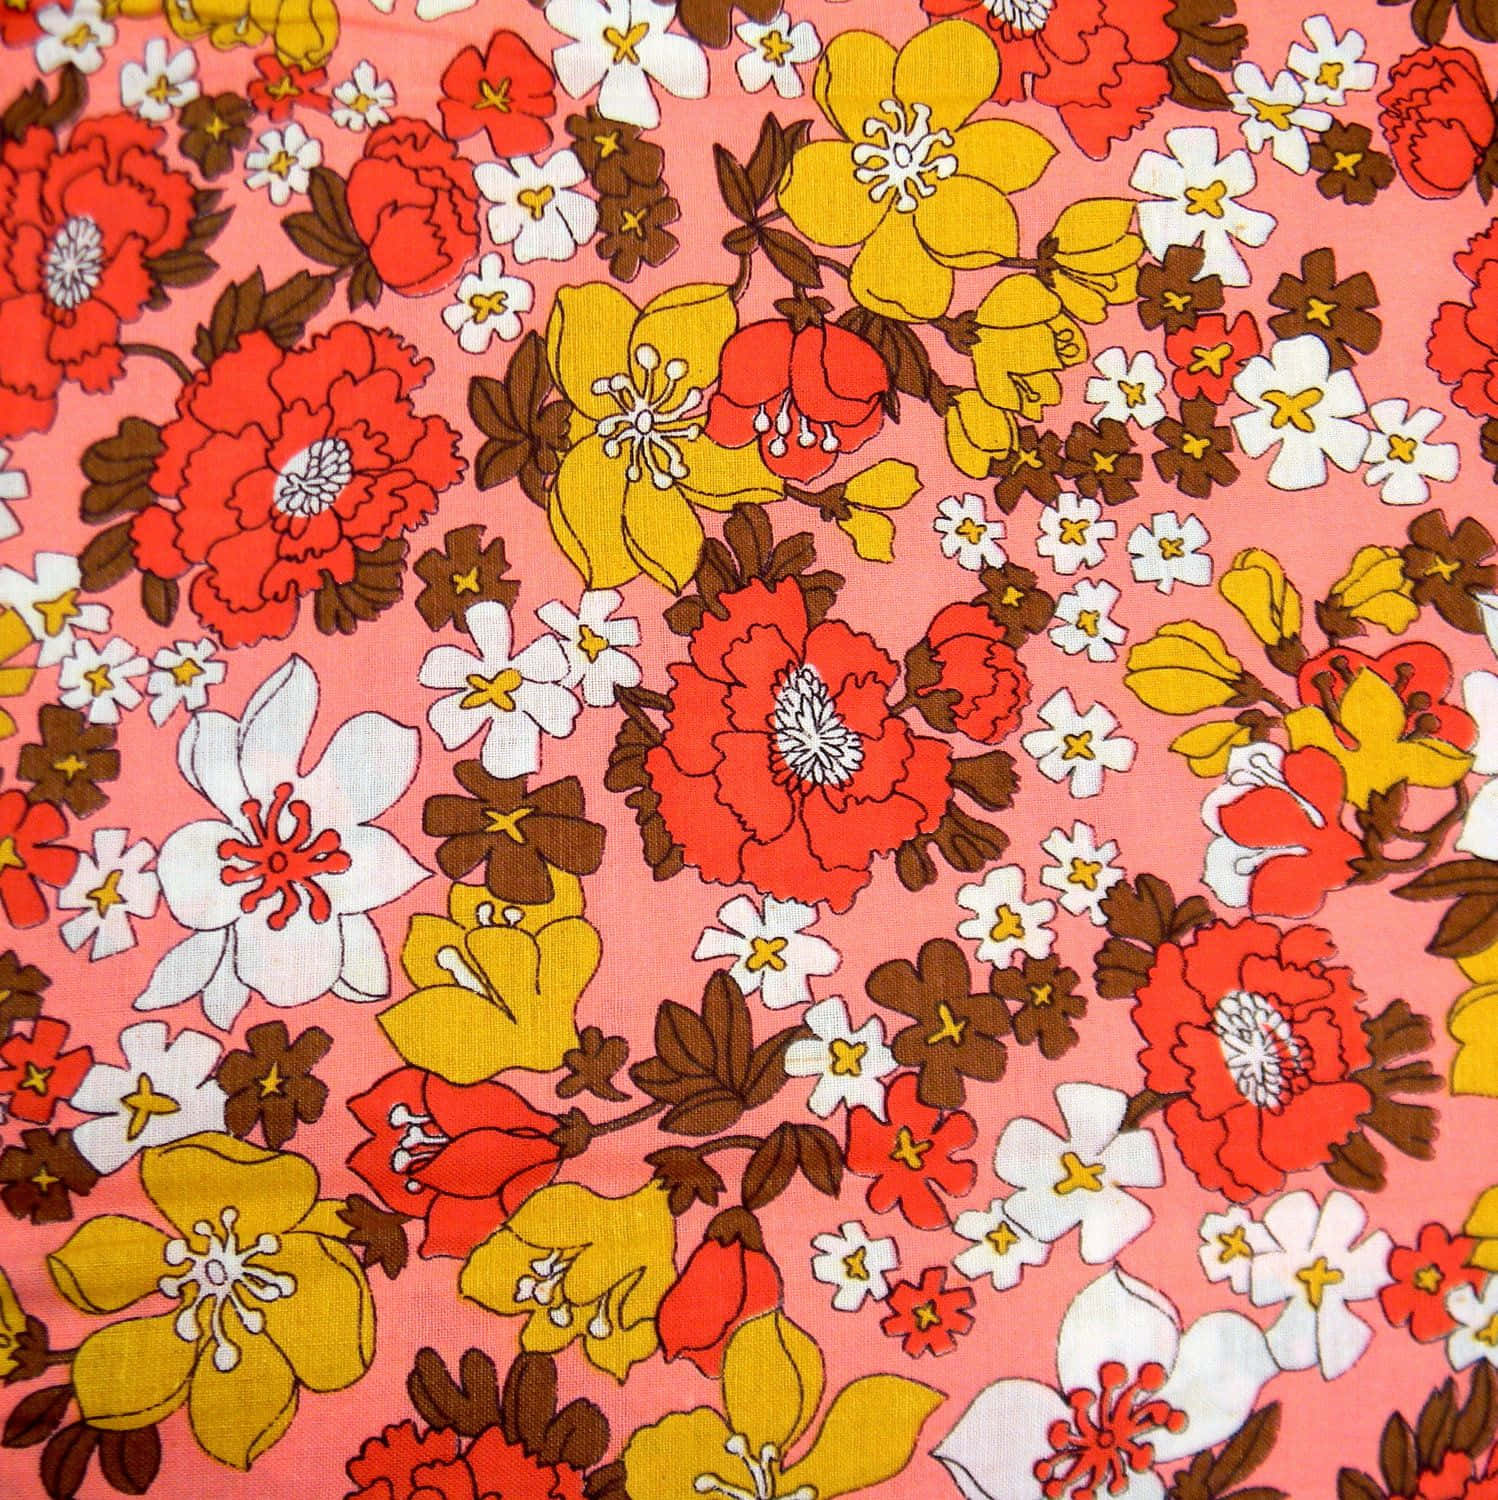 A Pink Floral Fabric With Yellow And Orange Flowers Wallpaper